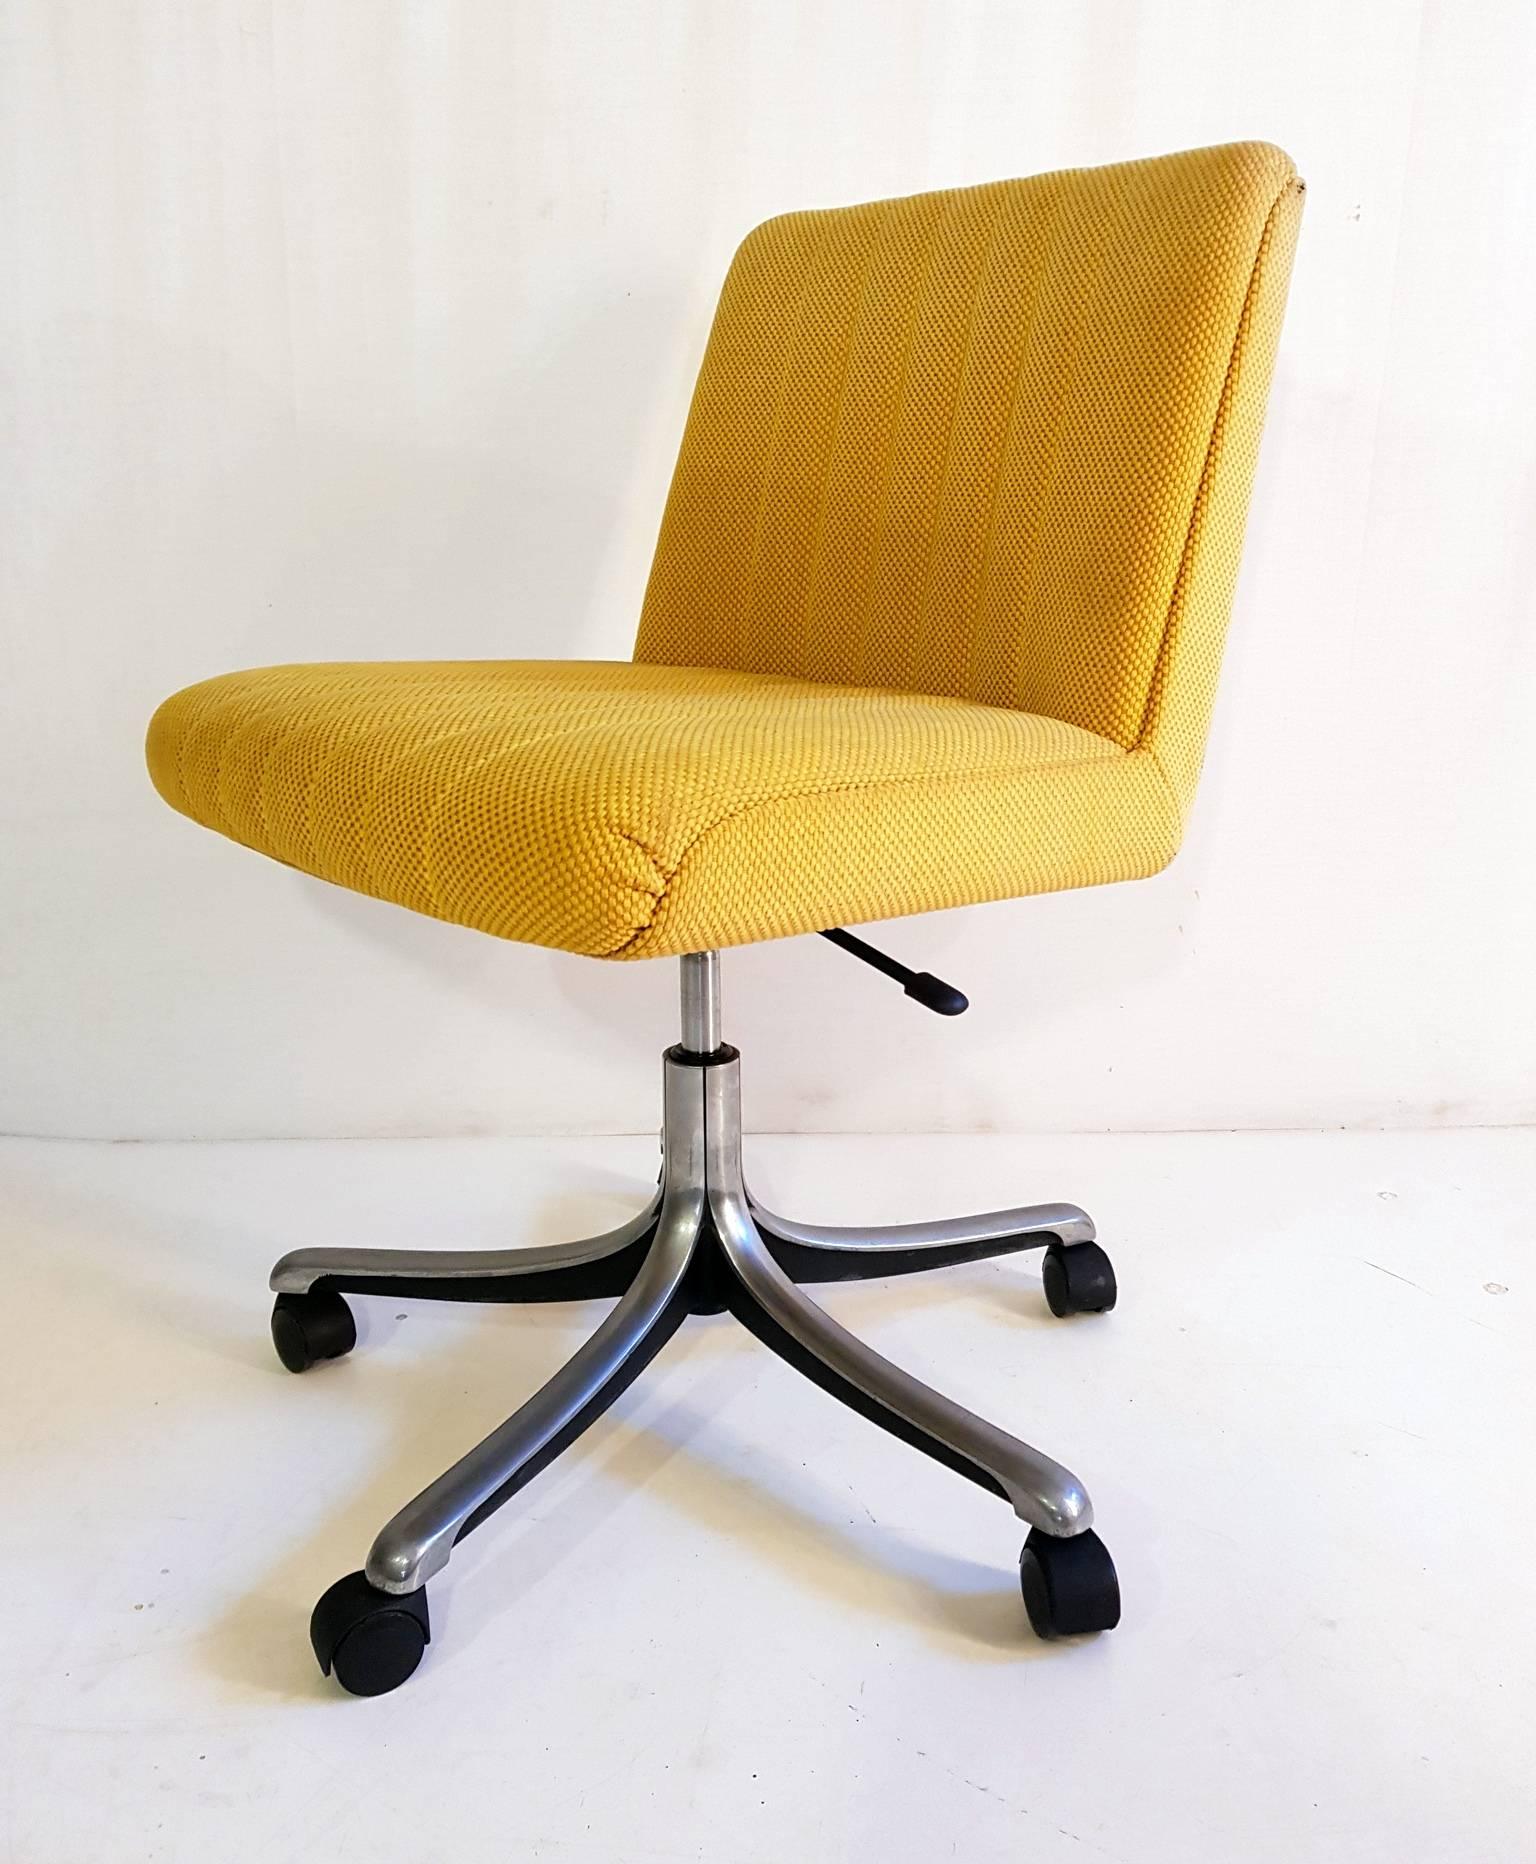 Six identical swivel office chairs on wheels by Osvaldo Borsani for Tecno with adjustable in height that functions well. The difference in height is about 7 cm from the highest to the lowest position. All chairs are covered in their original yellow